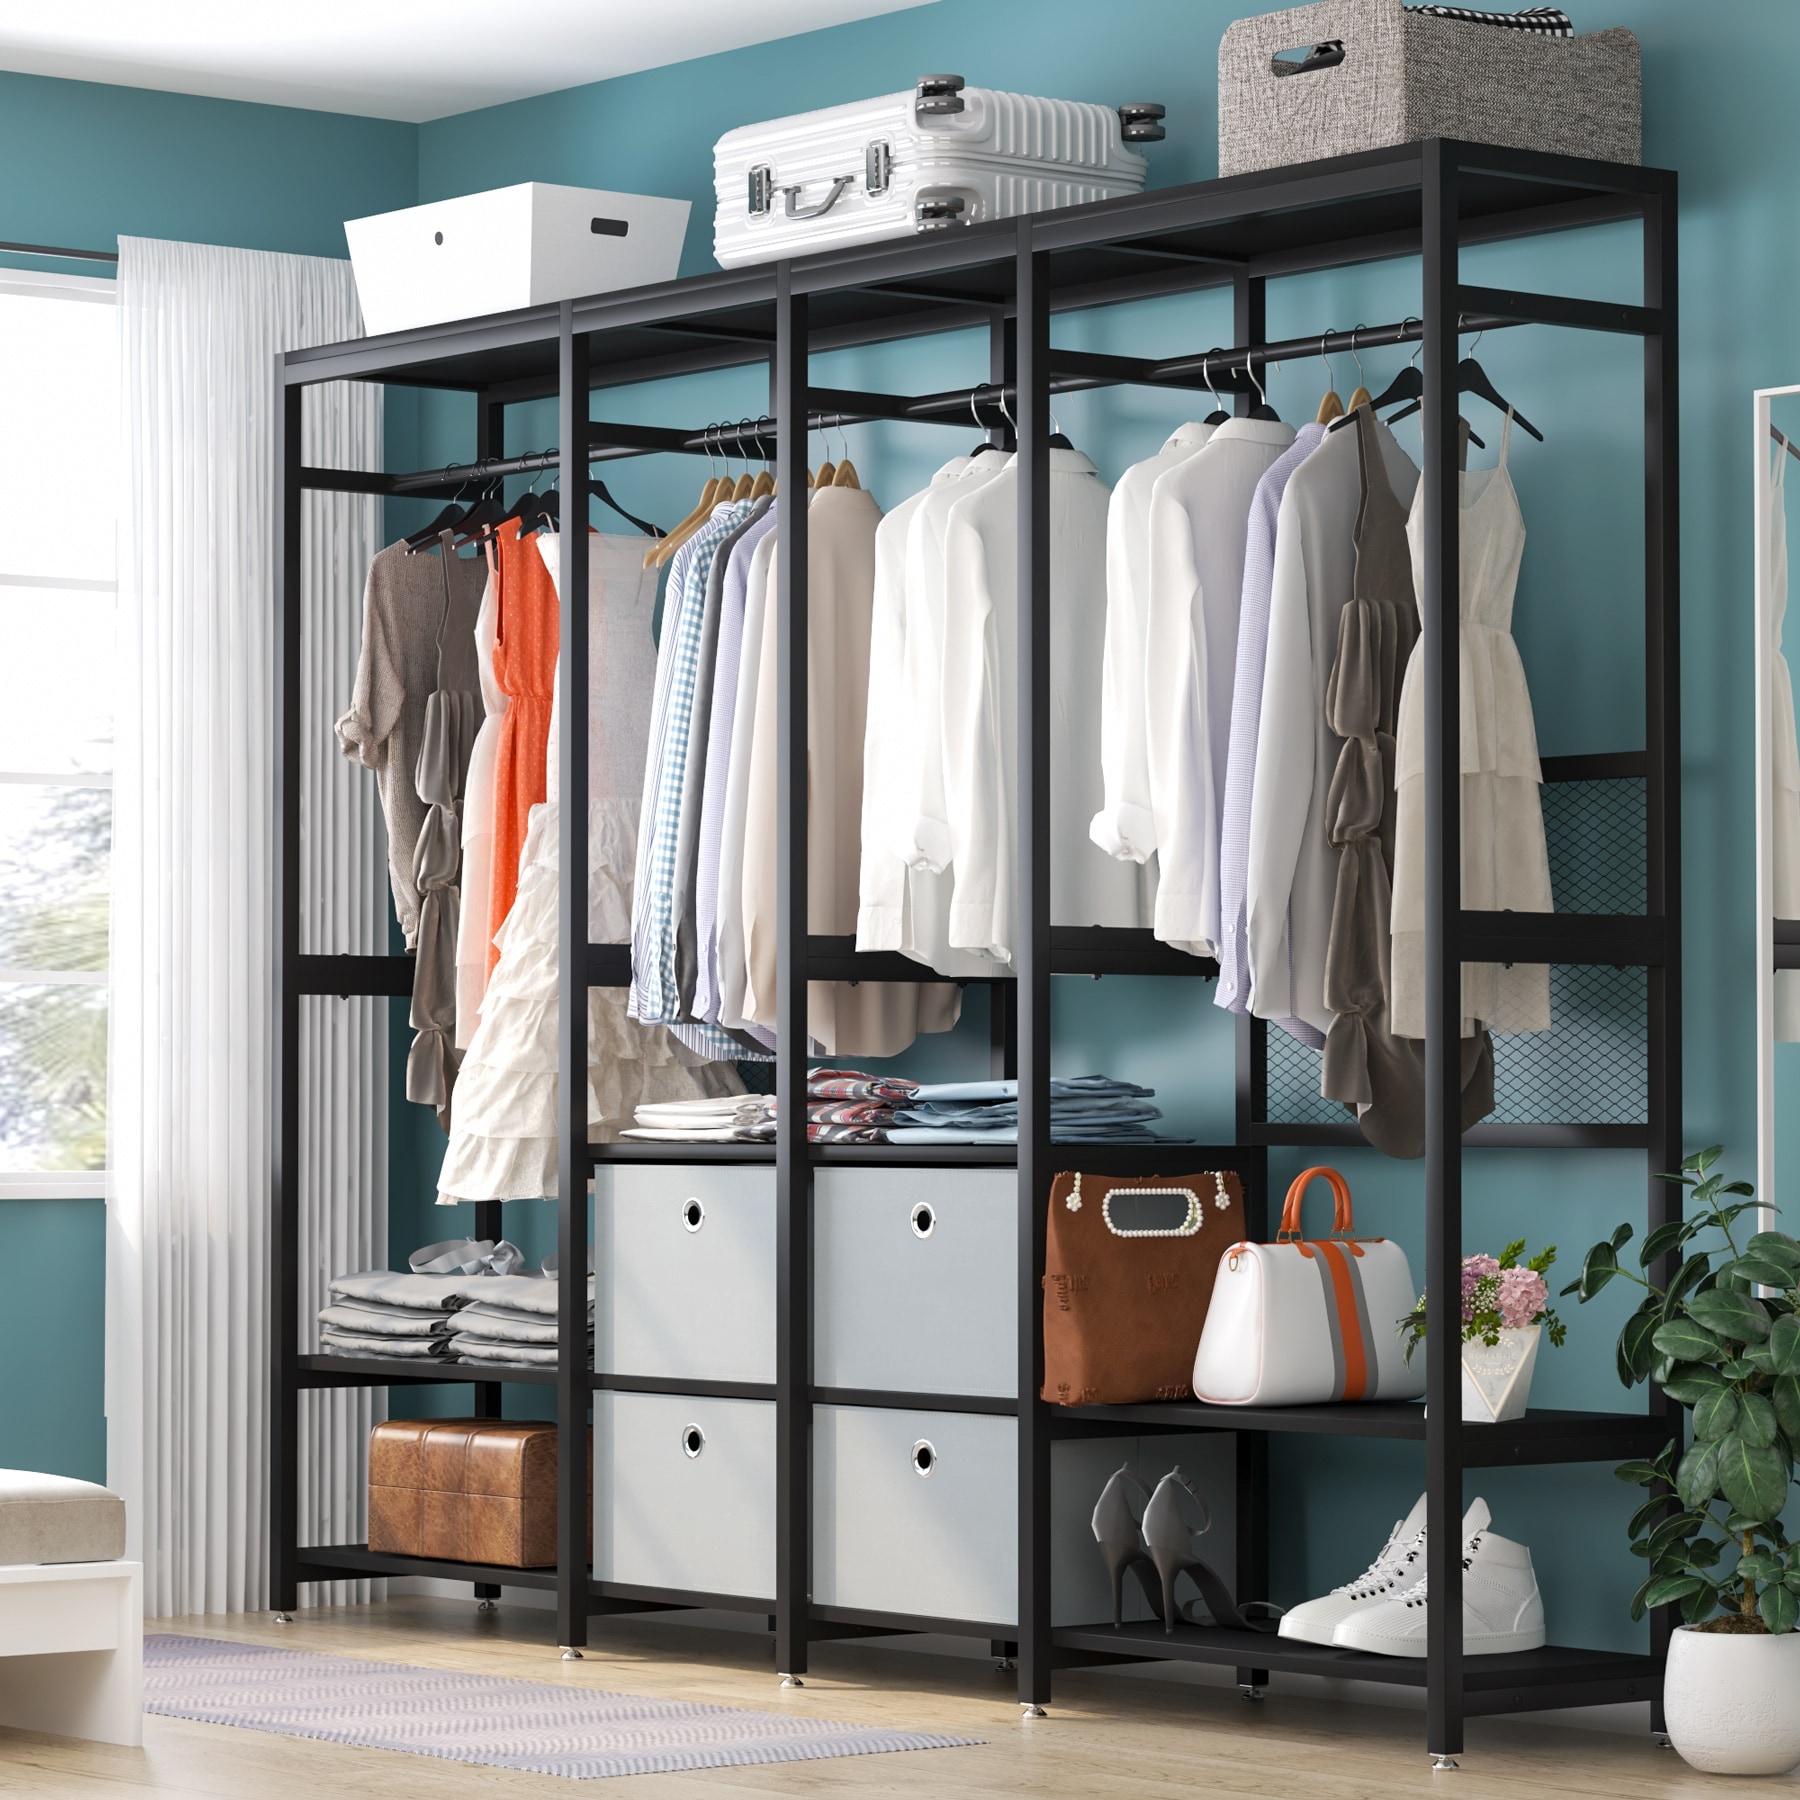 https://ak1.ostkcdn.com/images/products/is/images/direct/4ee24c372909fa48464e670c9406a3b7520274d6/Tribesigns-Freestanding-Closet-Organizer%2C-Heavy-Duty-Clothes-Closet.jpg